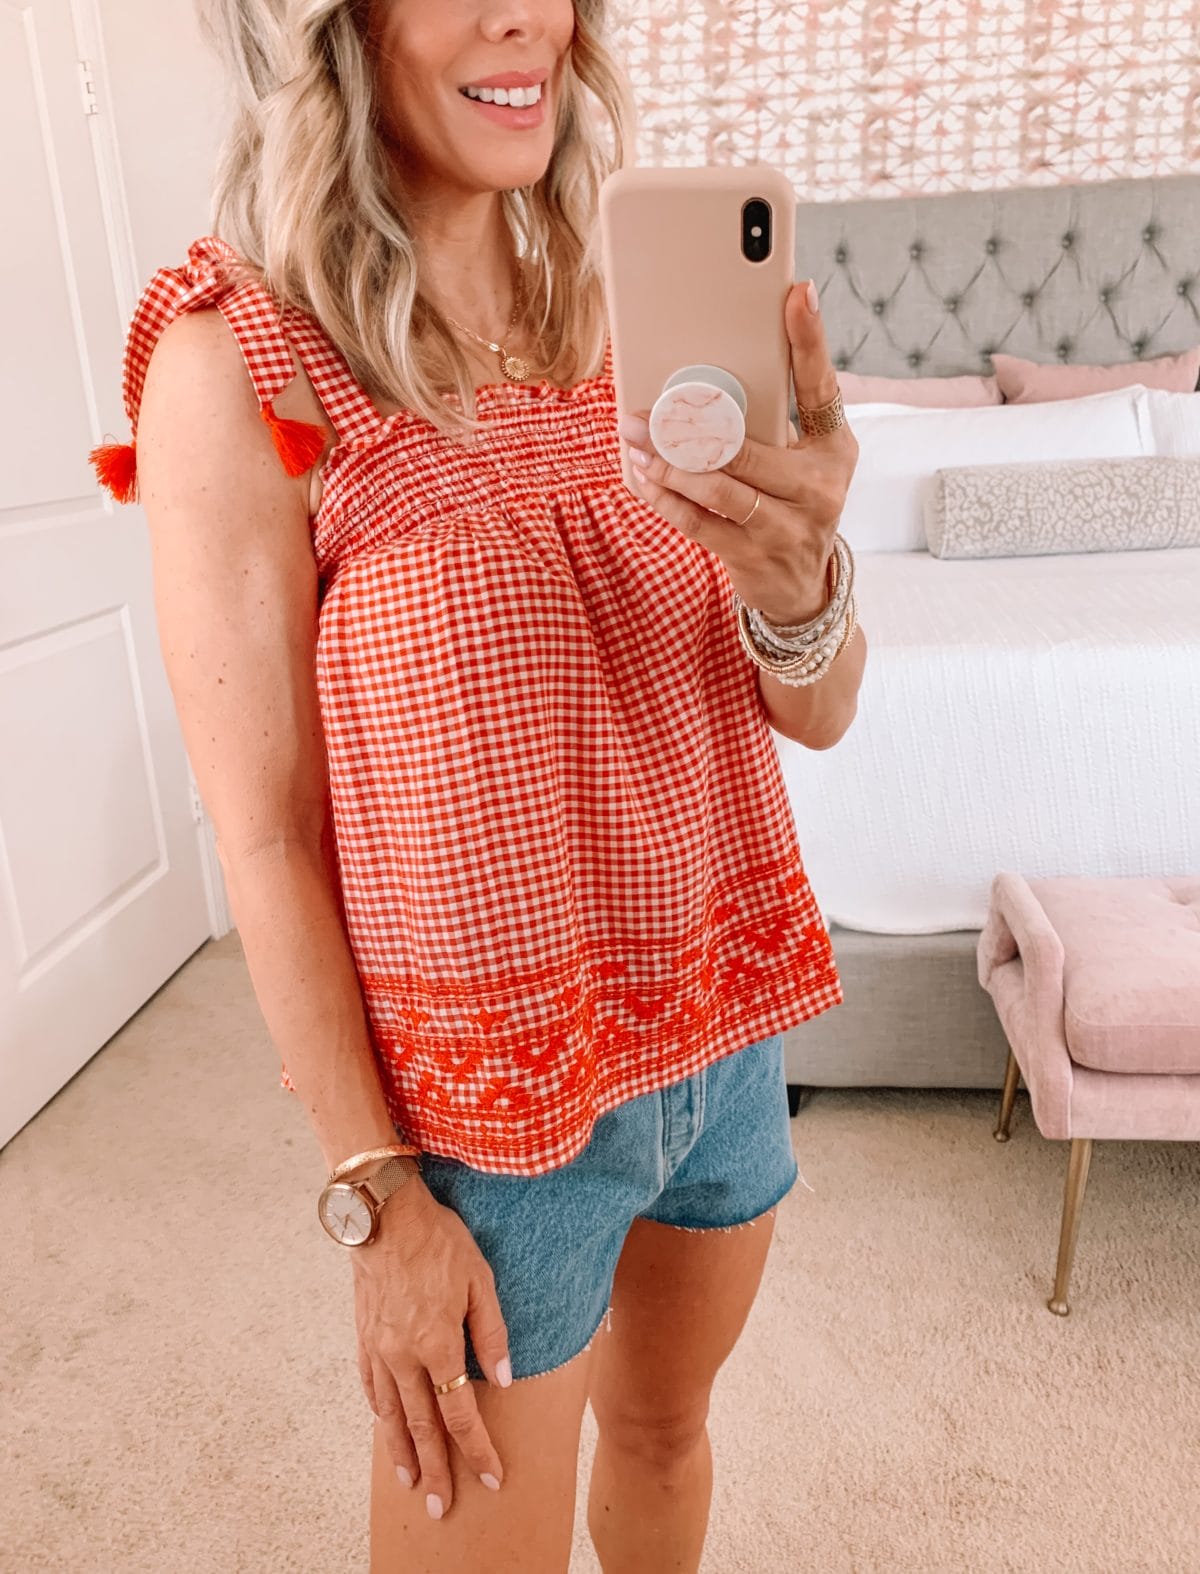 Dressing Room Finds, LOFT, Gingham Swing Tank and Denim Shorts with Sandals